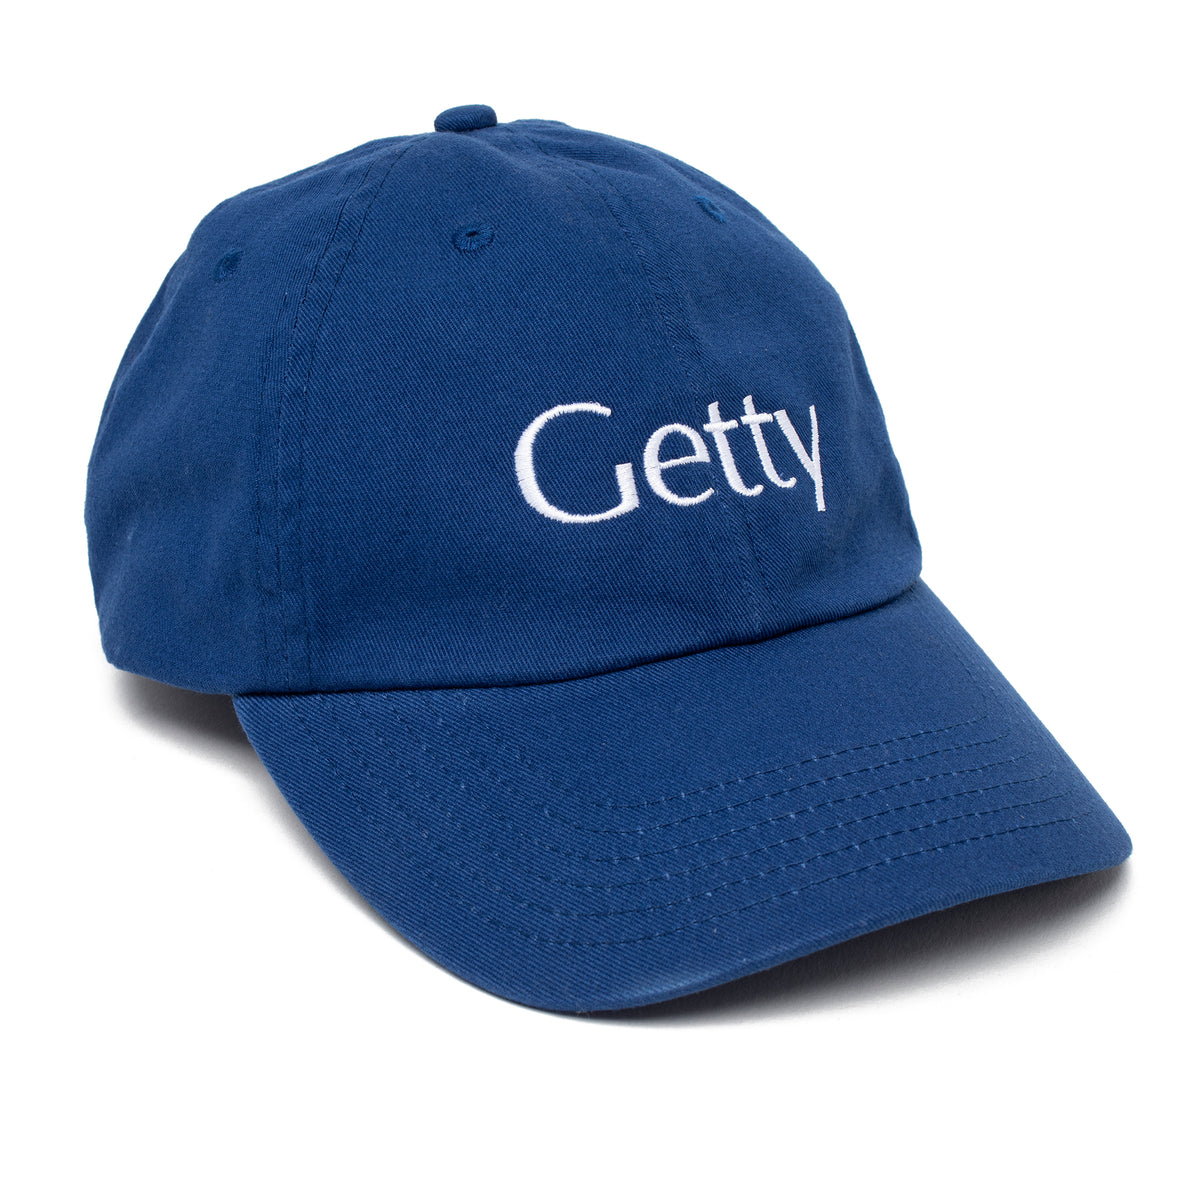 Getty Embroidered Logo Cap - Blue